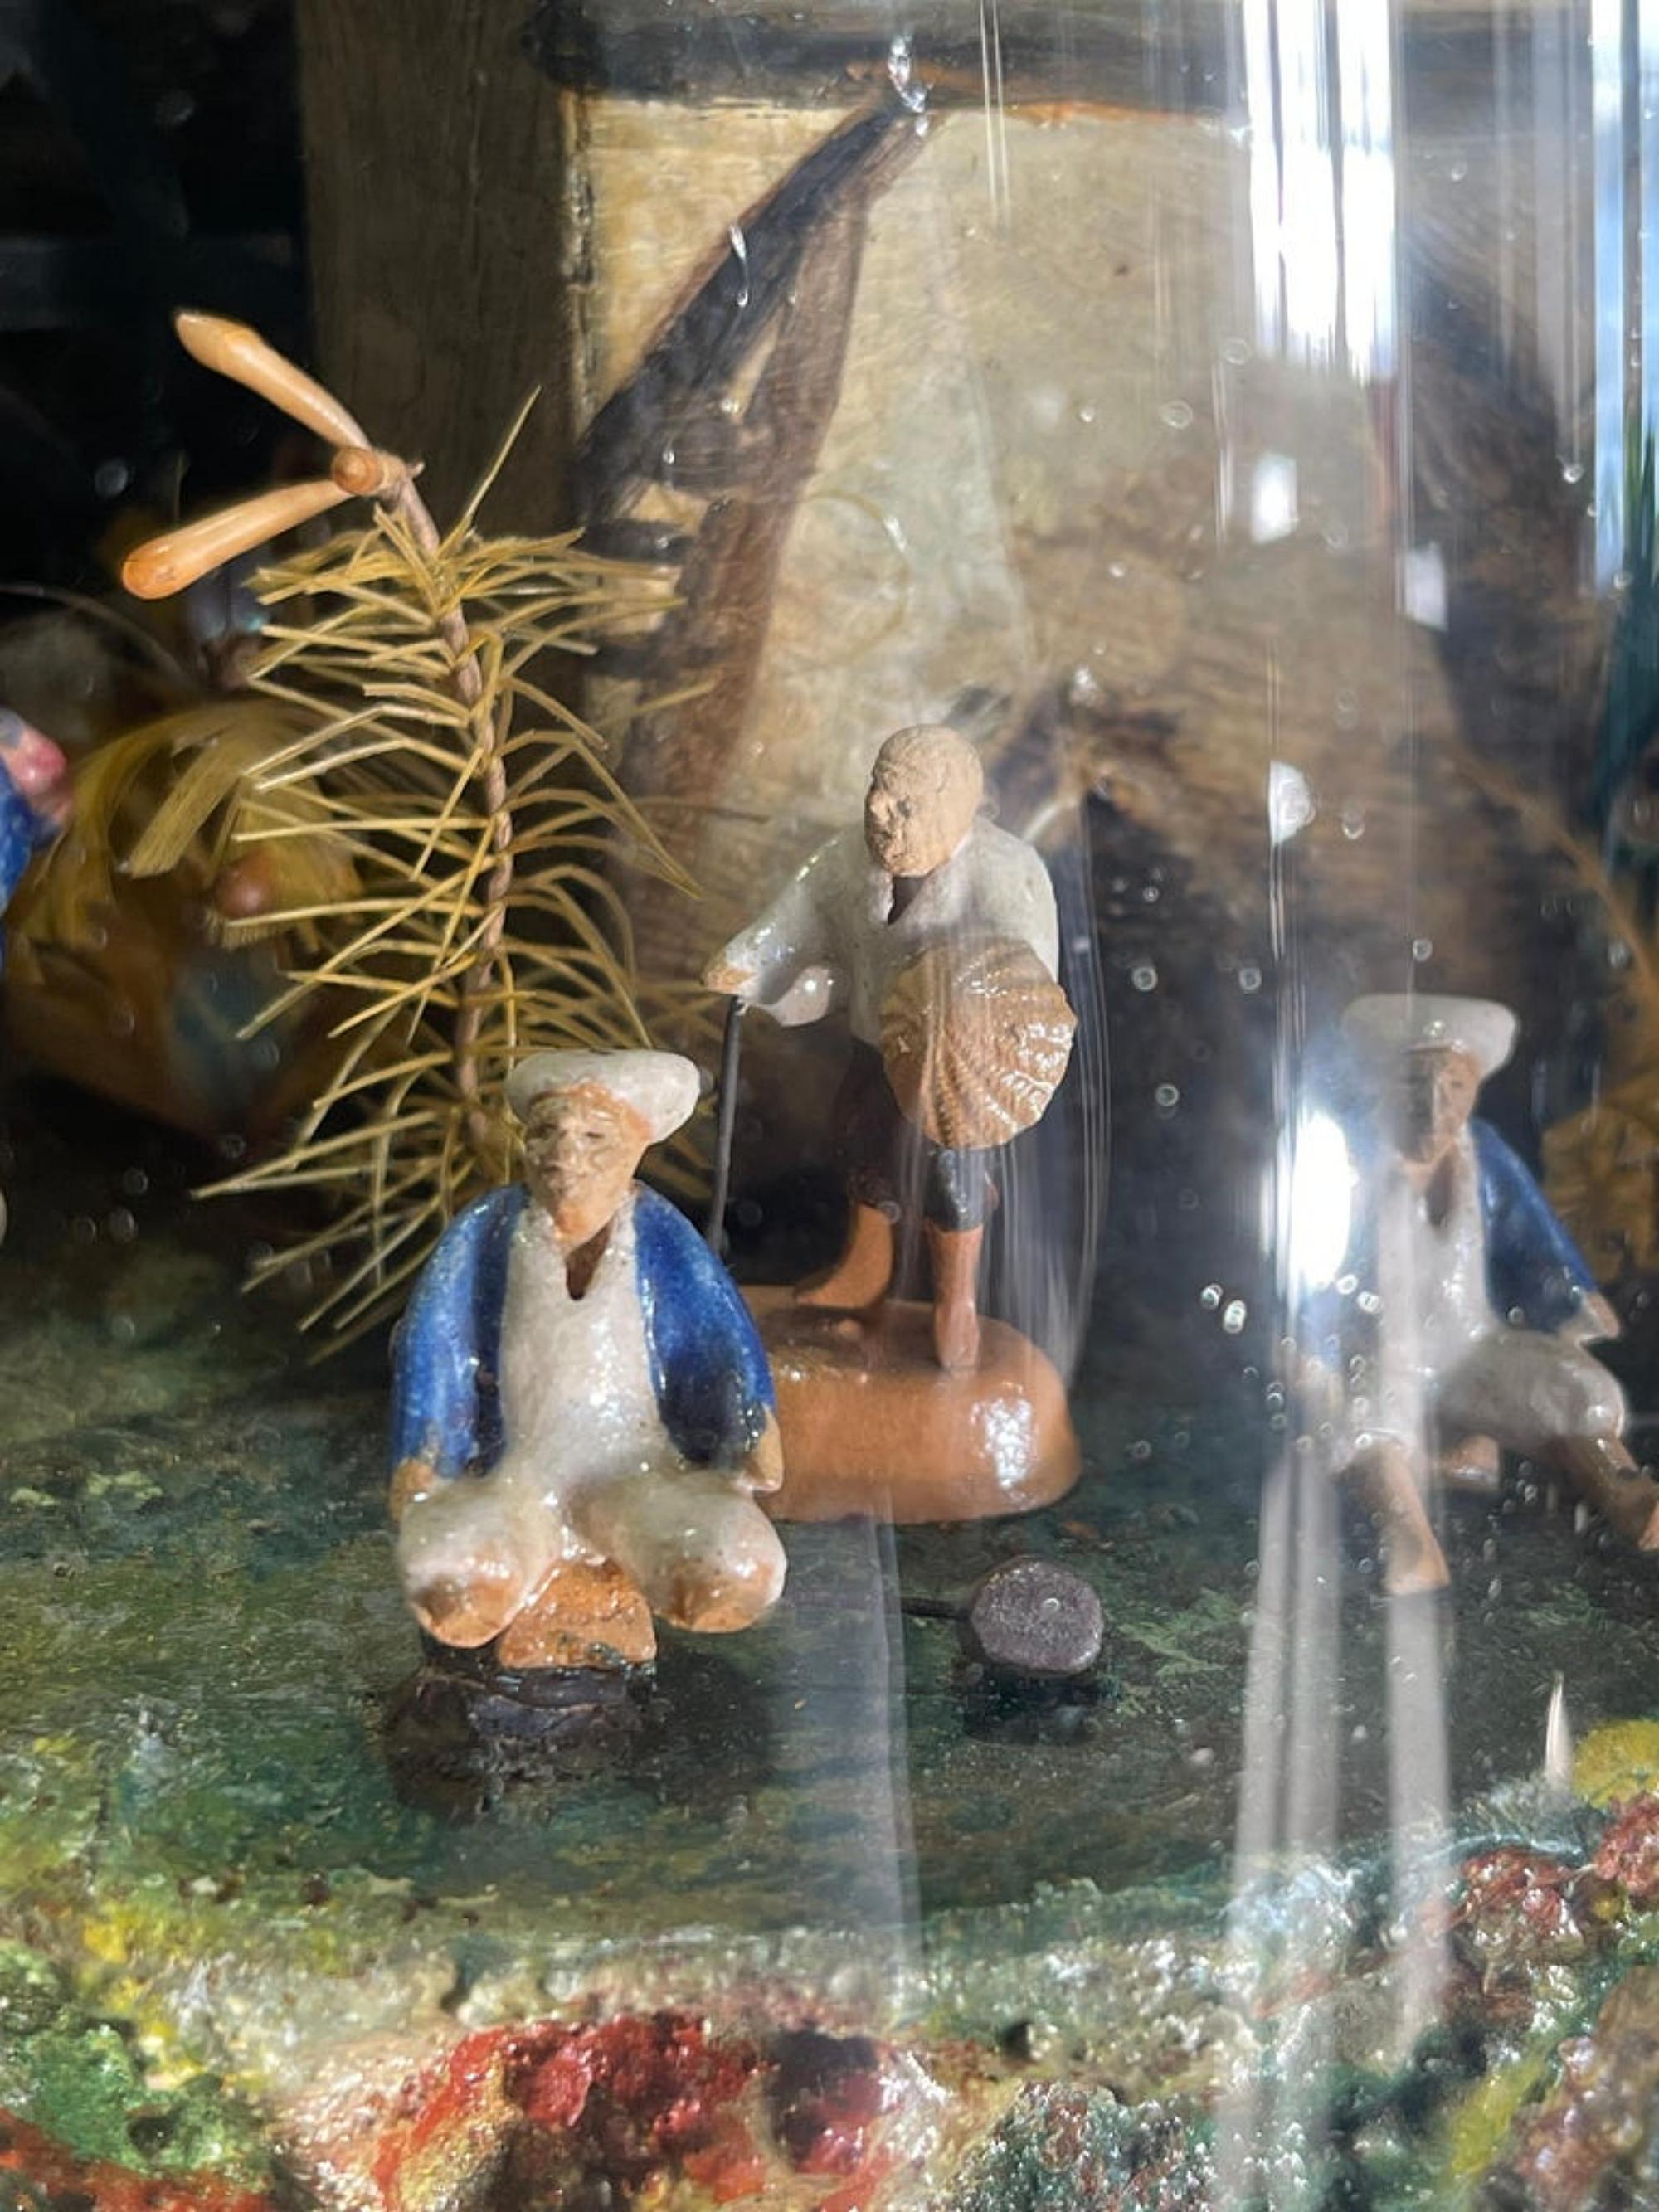 Important French Automaton
circa 1880 representing river scenery with boat, train, rural houses and animals. In various materials, glass dome with wooden base.
On the move.
Dim.: 47 x 44 x 19 cm
Good conditions.